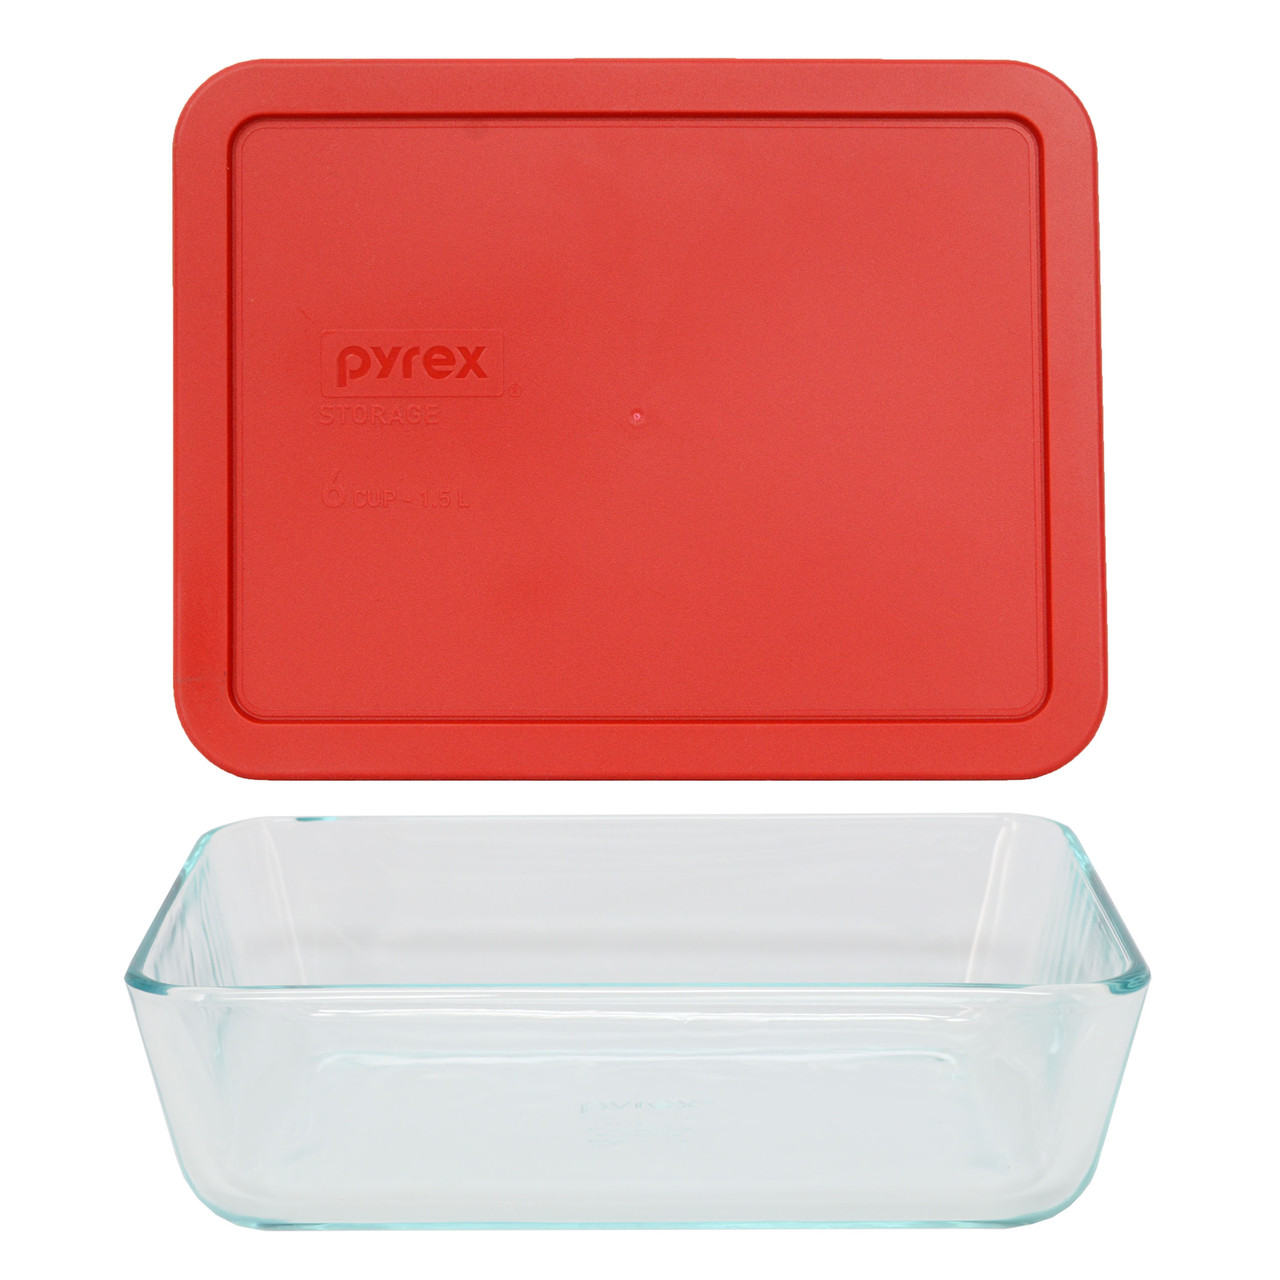 Pyrex 7211 6-Cup Glass Food Storage Dish and 7211-PC Poppy Red Plastic Lid